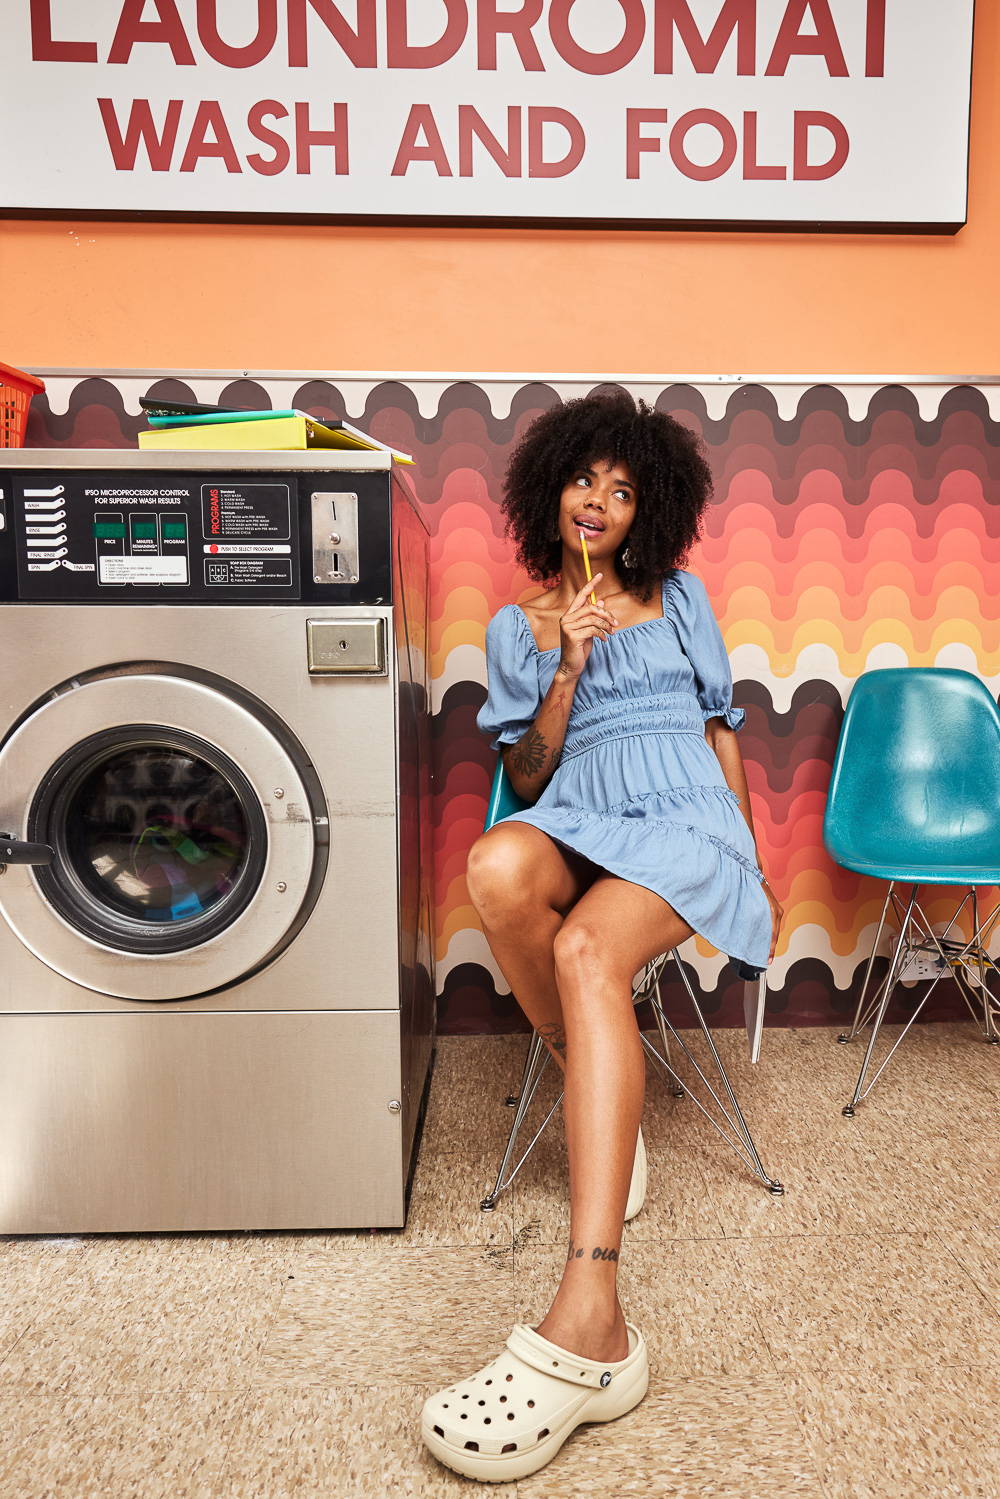 Trixxi Back to school embracing dorm life doing laundry in a laundromat wearing a blue tier dress.